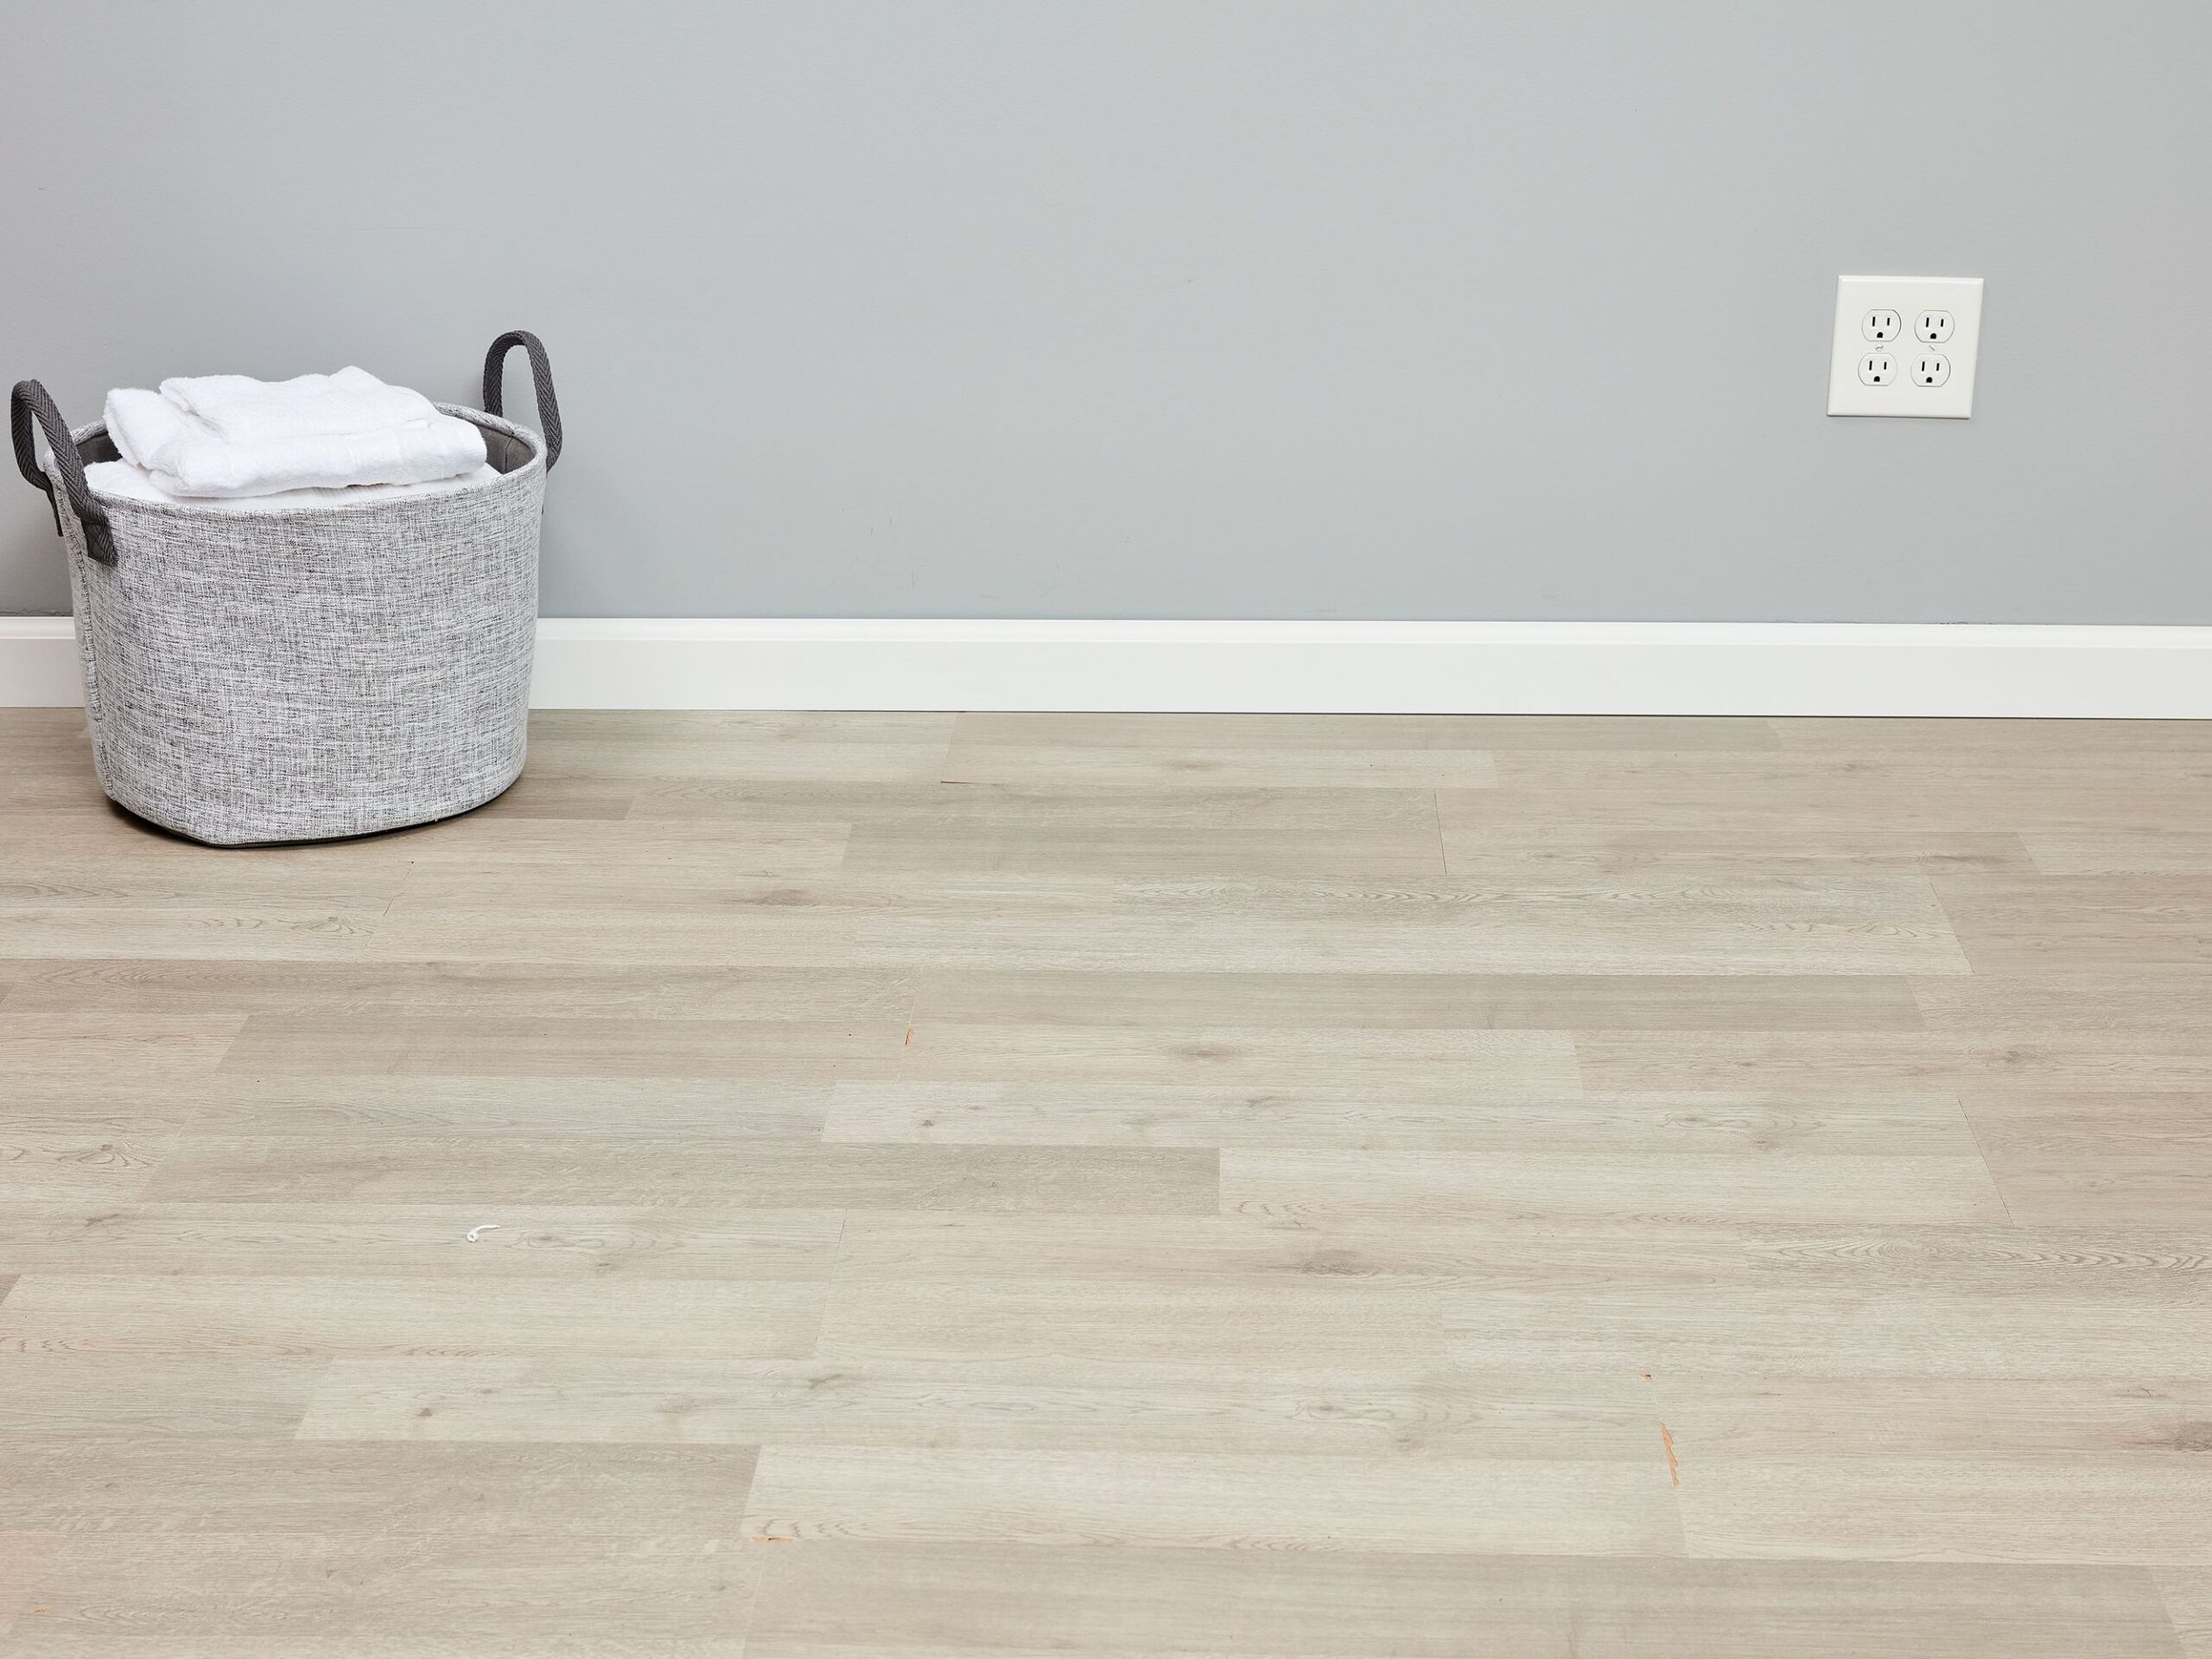 How to Care for and Polish or Coat Your Floor without Scratching